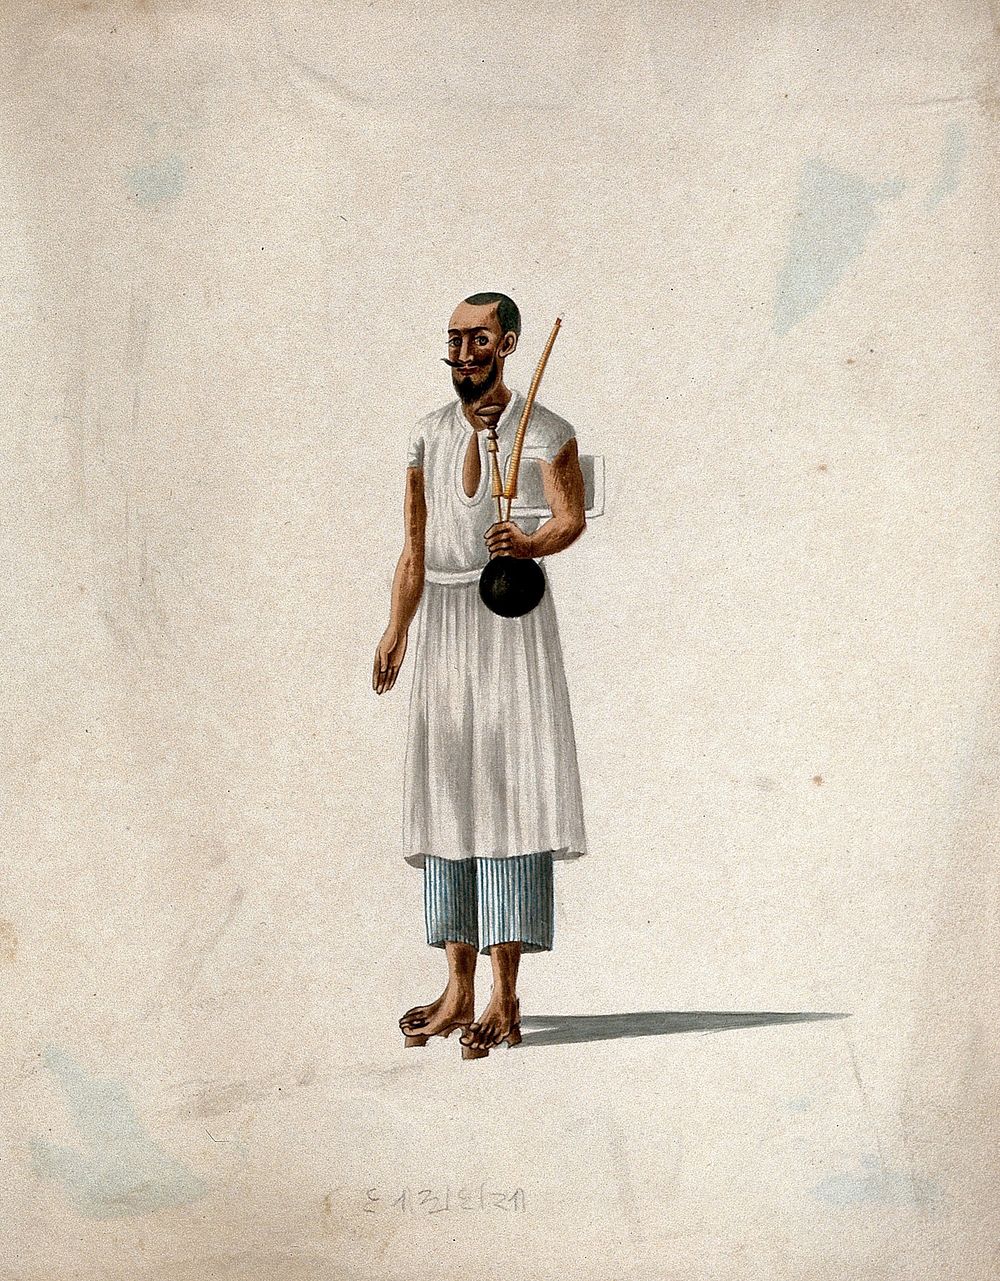 A man carrying a hookah pipe. Gouache painting by an Indian artist.